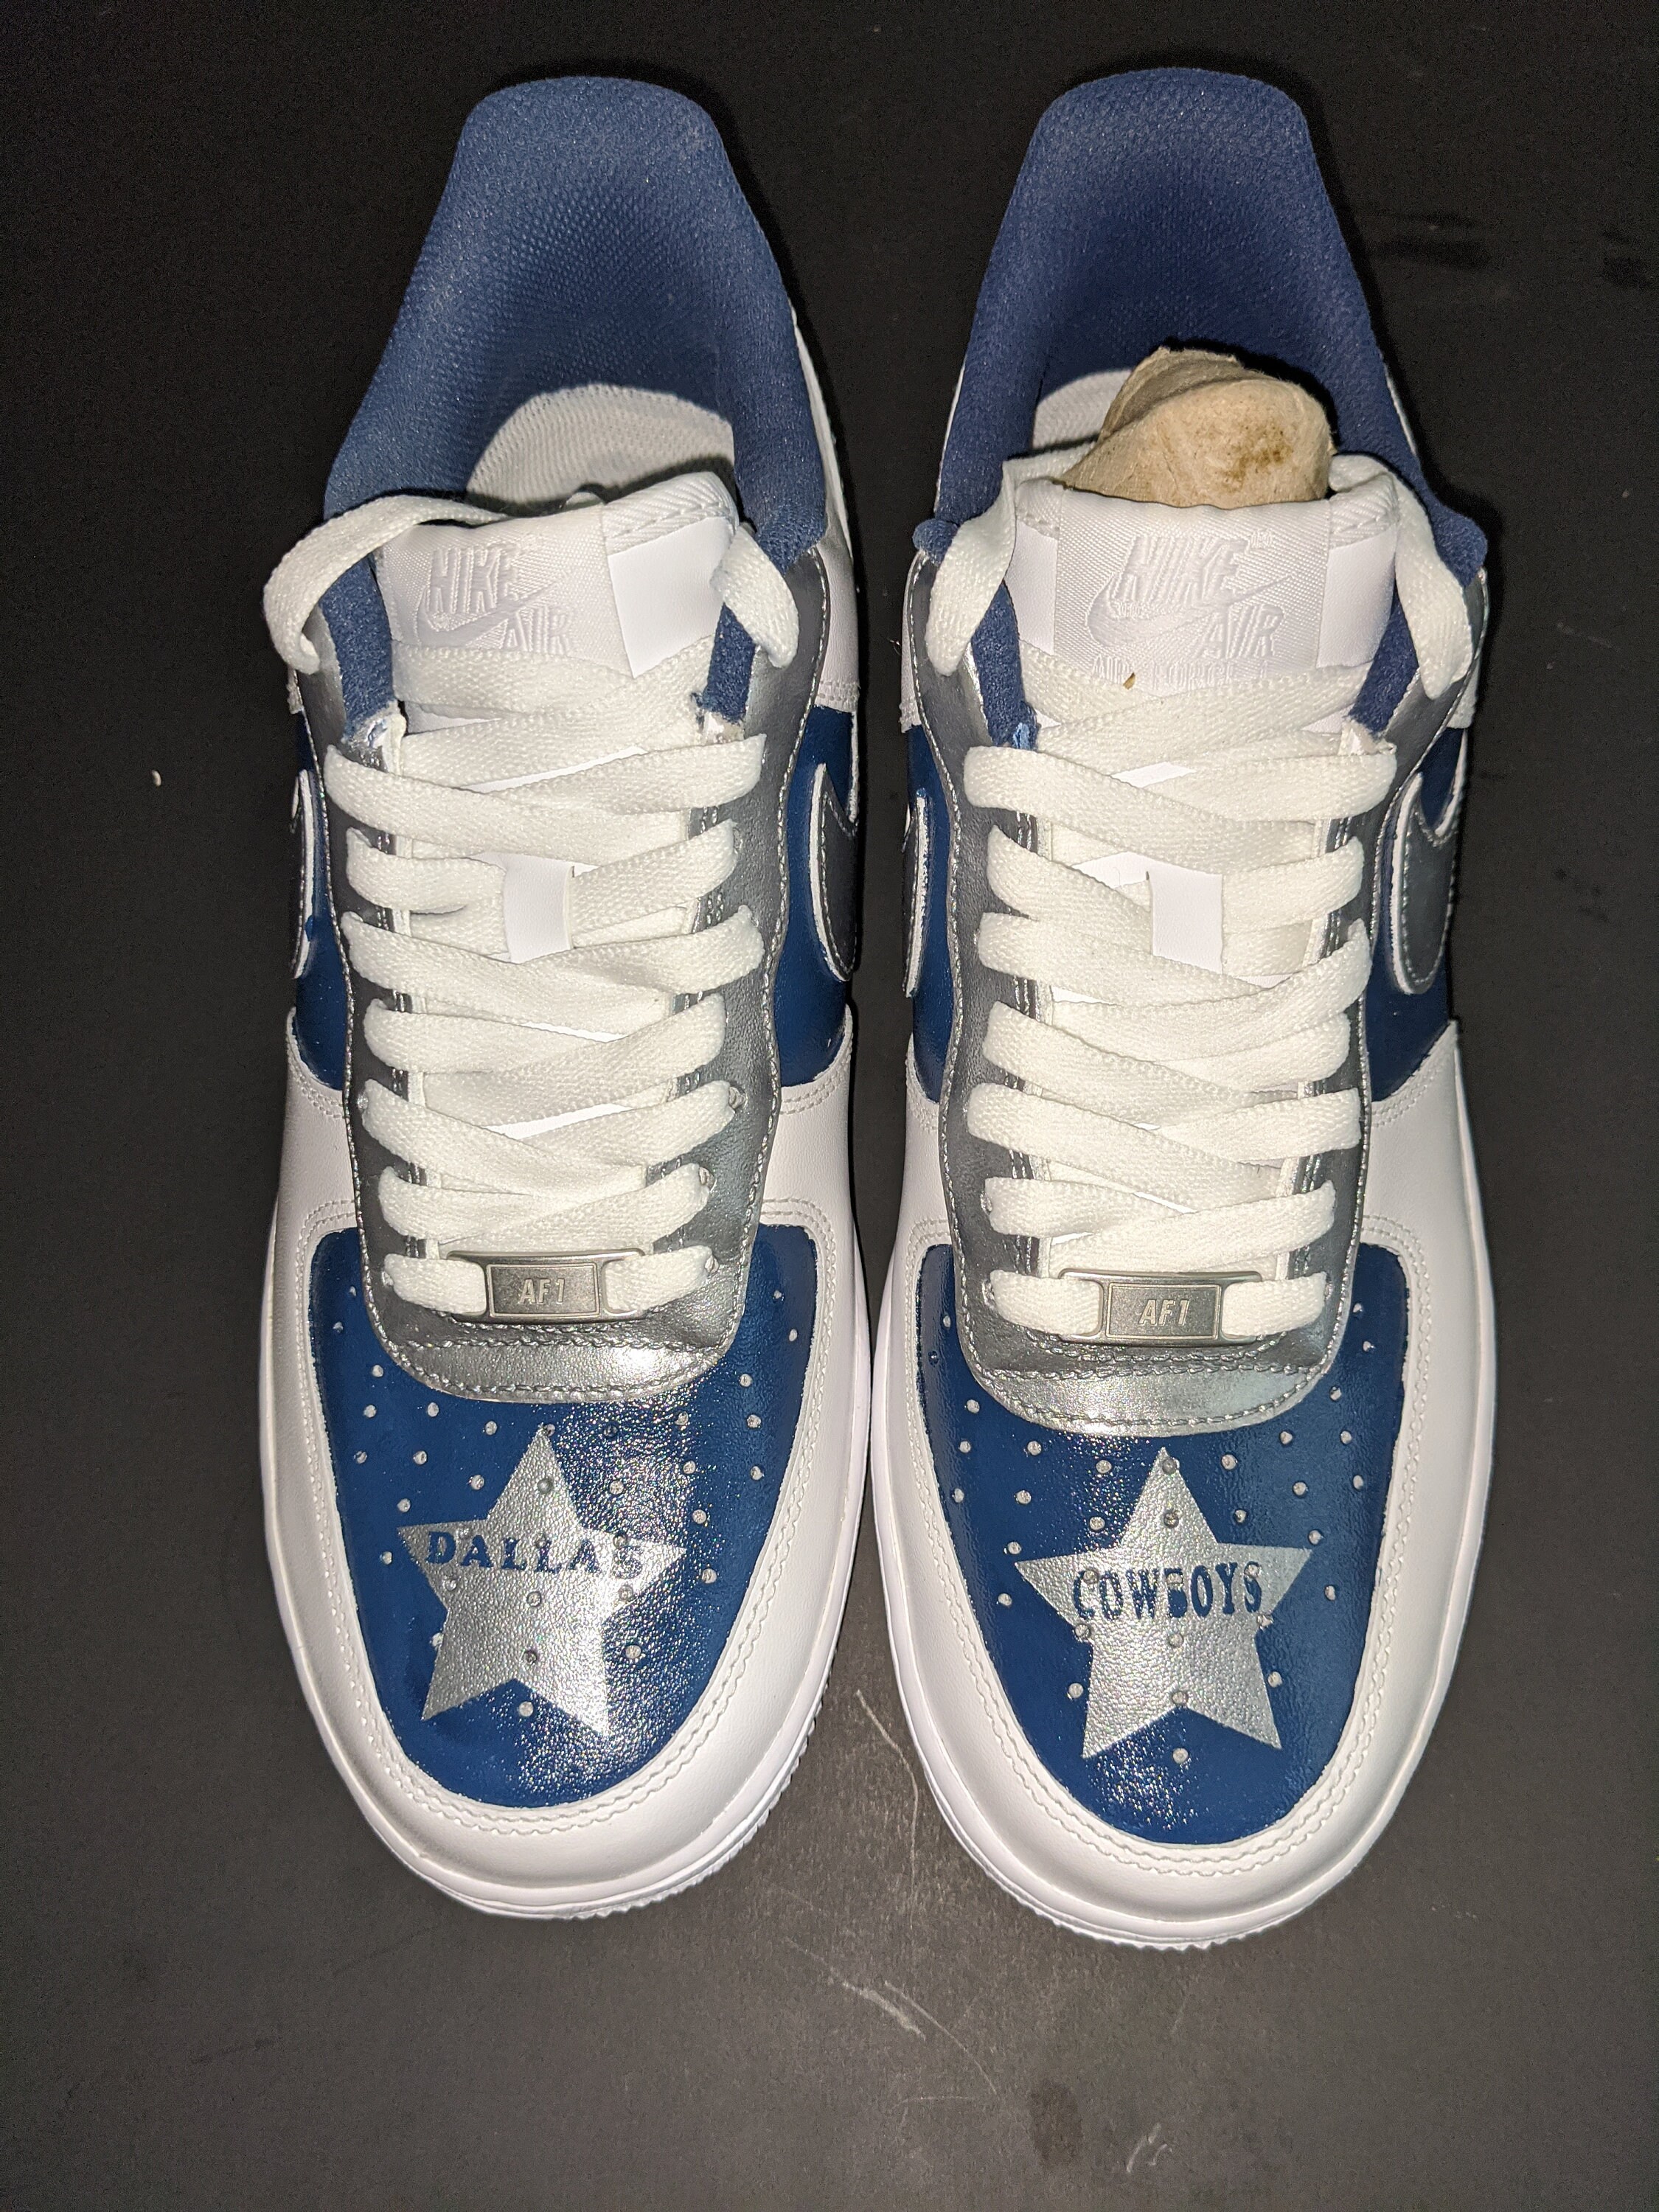 Dallas Cowboys Shoes Air Force 1 Gifts For Fans V02 - Tana Elegant